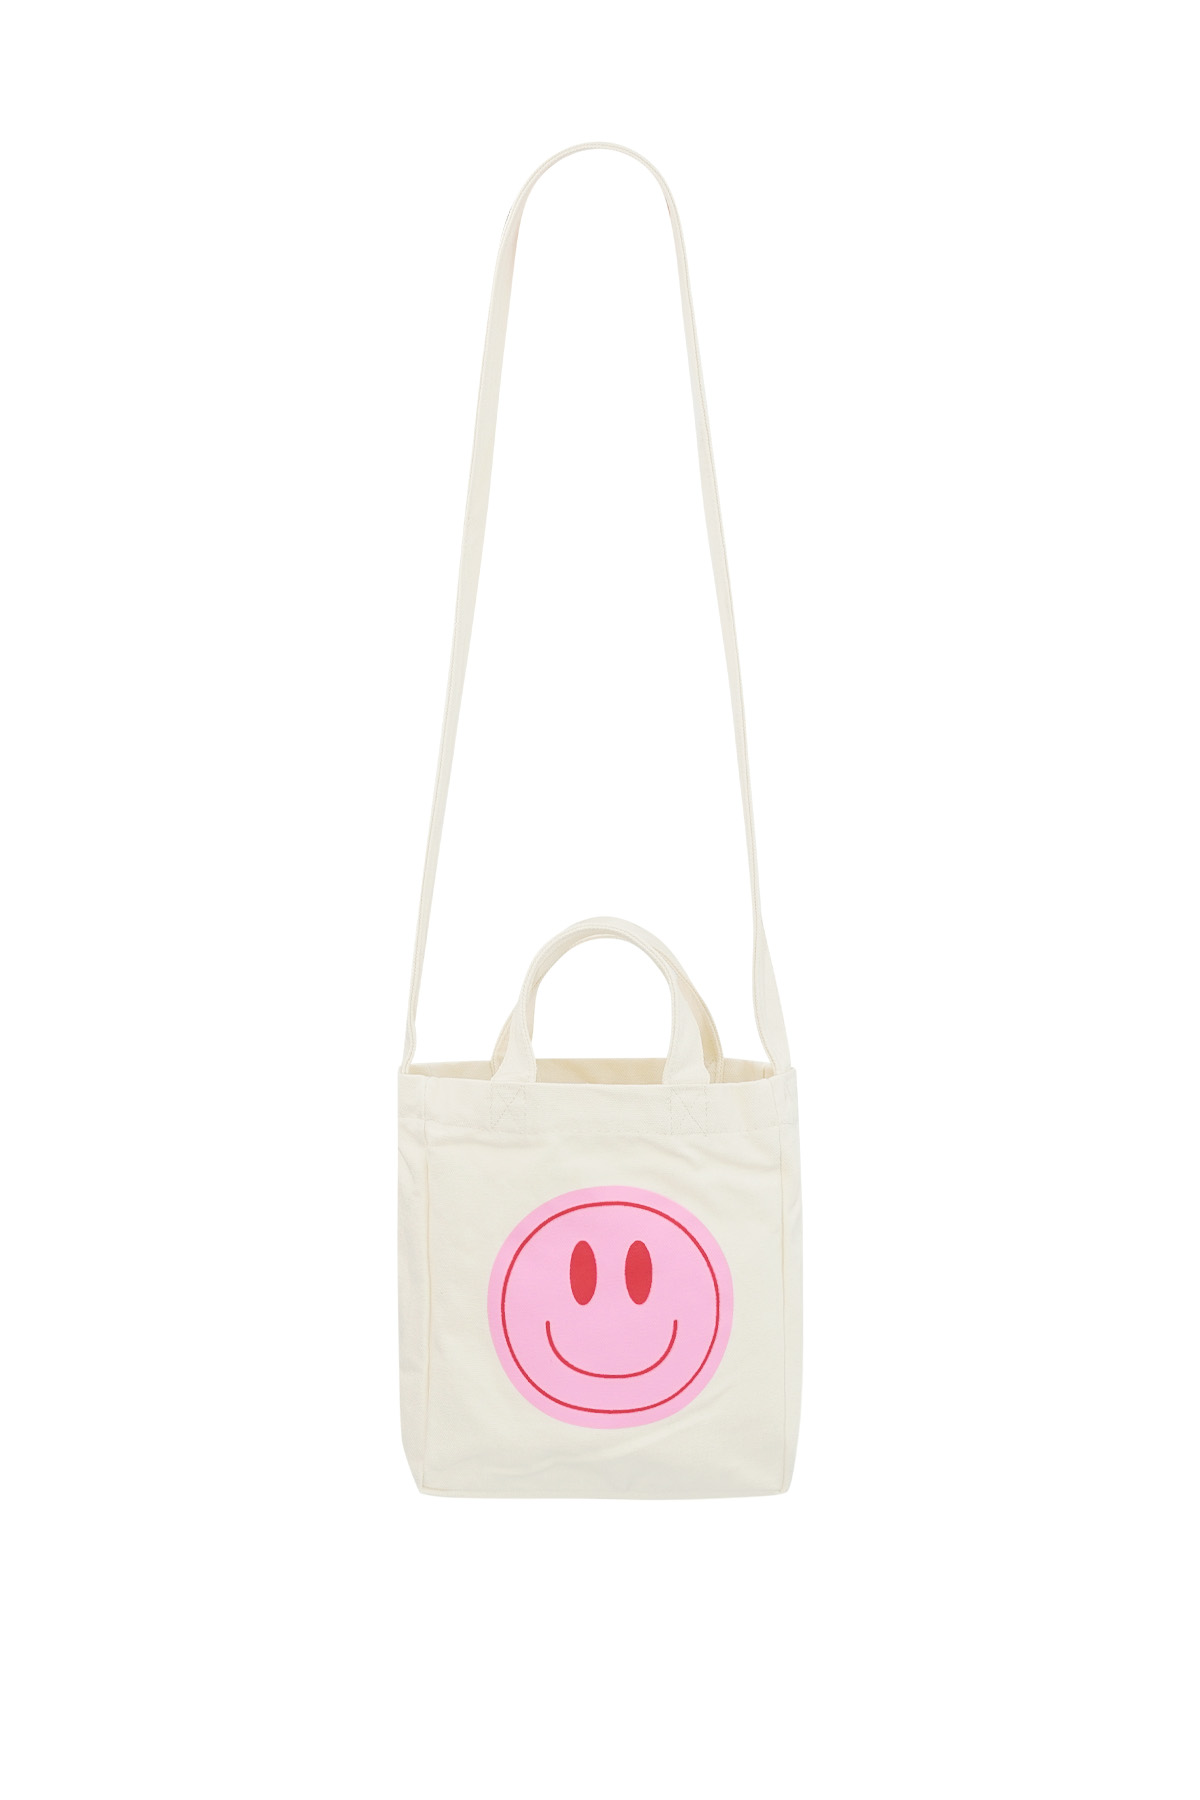 Canvas small bag smiley - pink Bag h5 Picture5